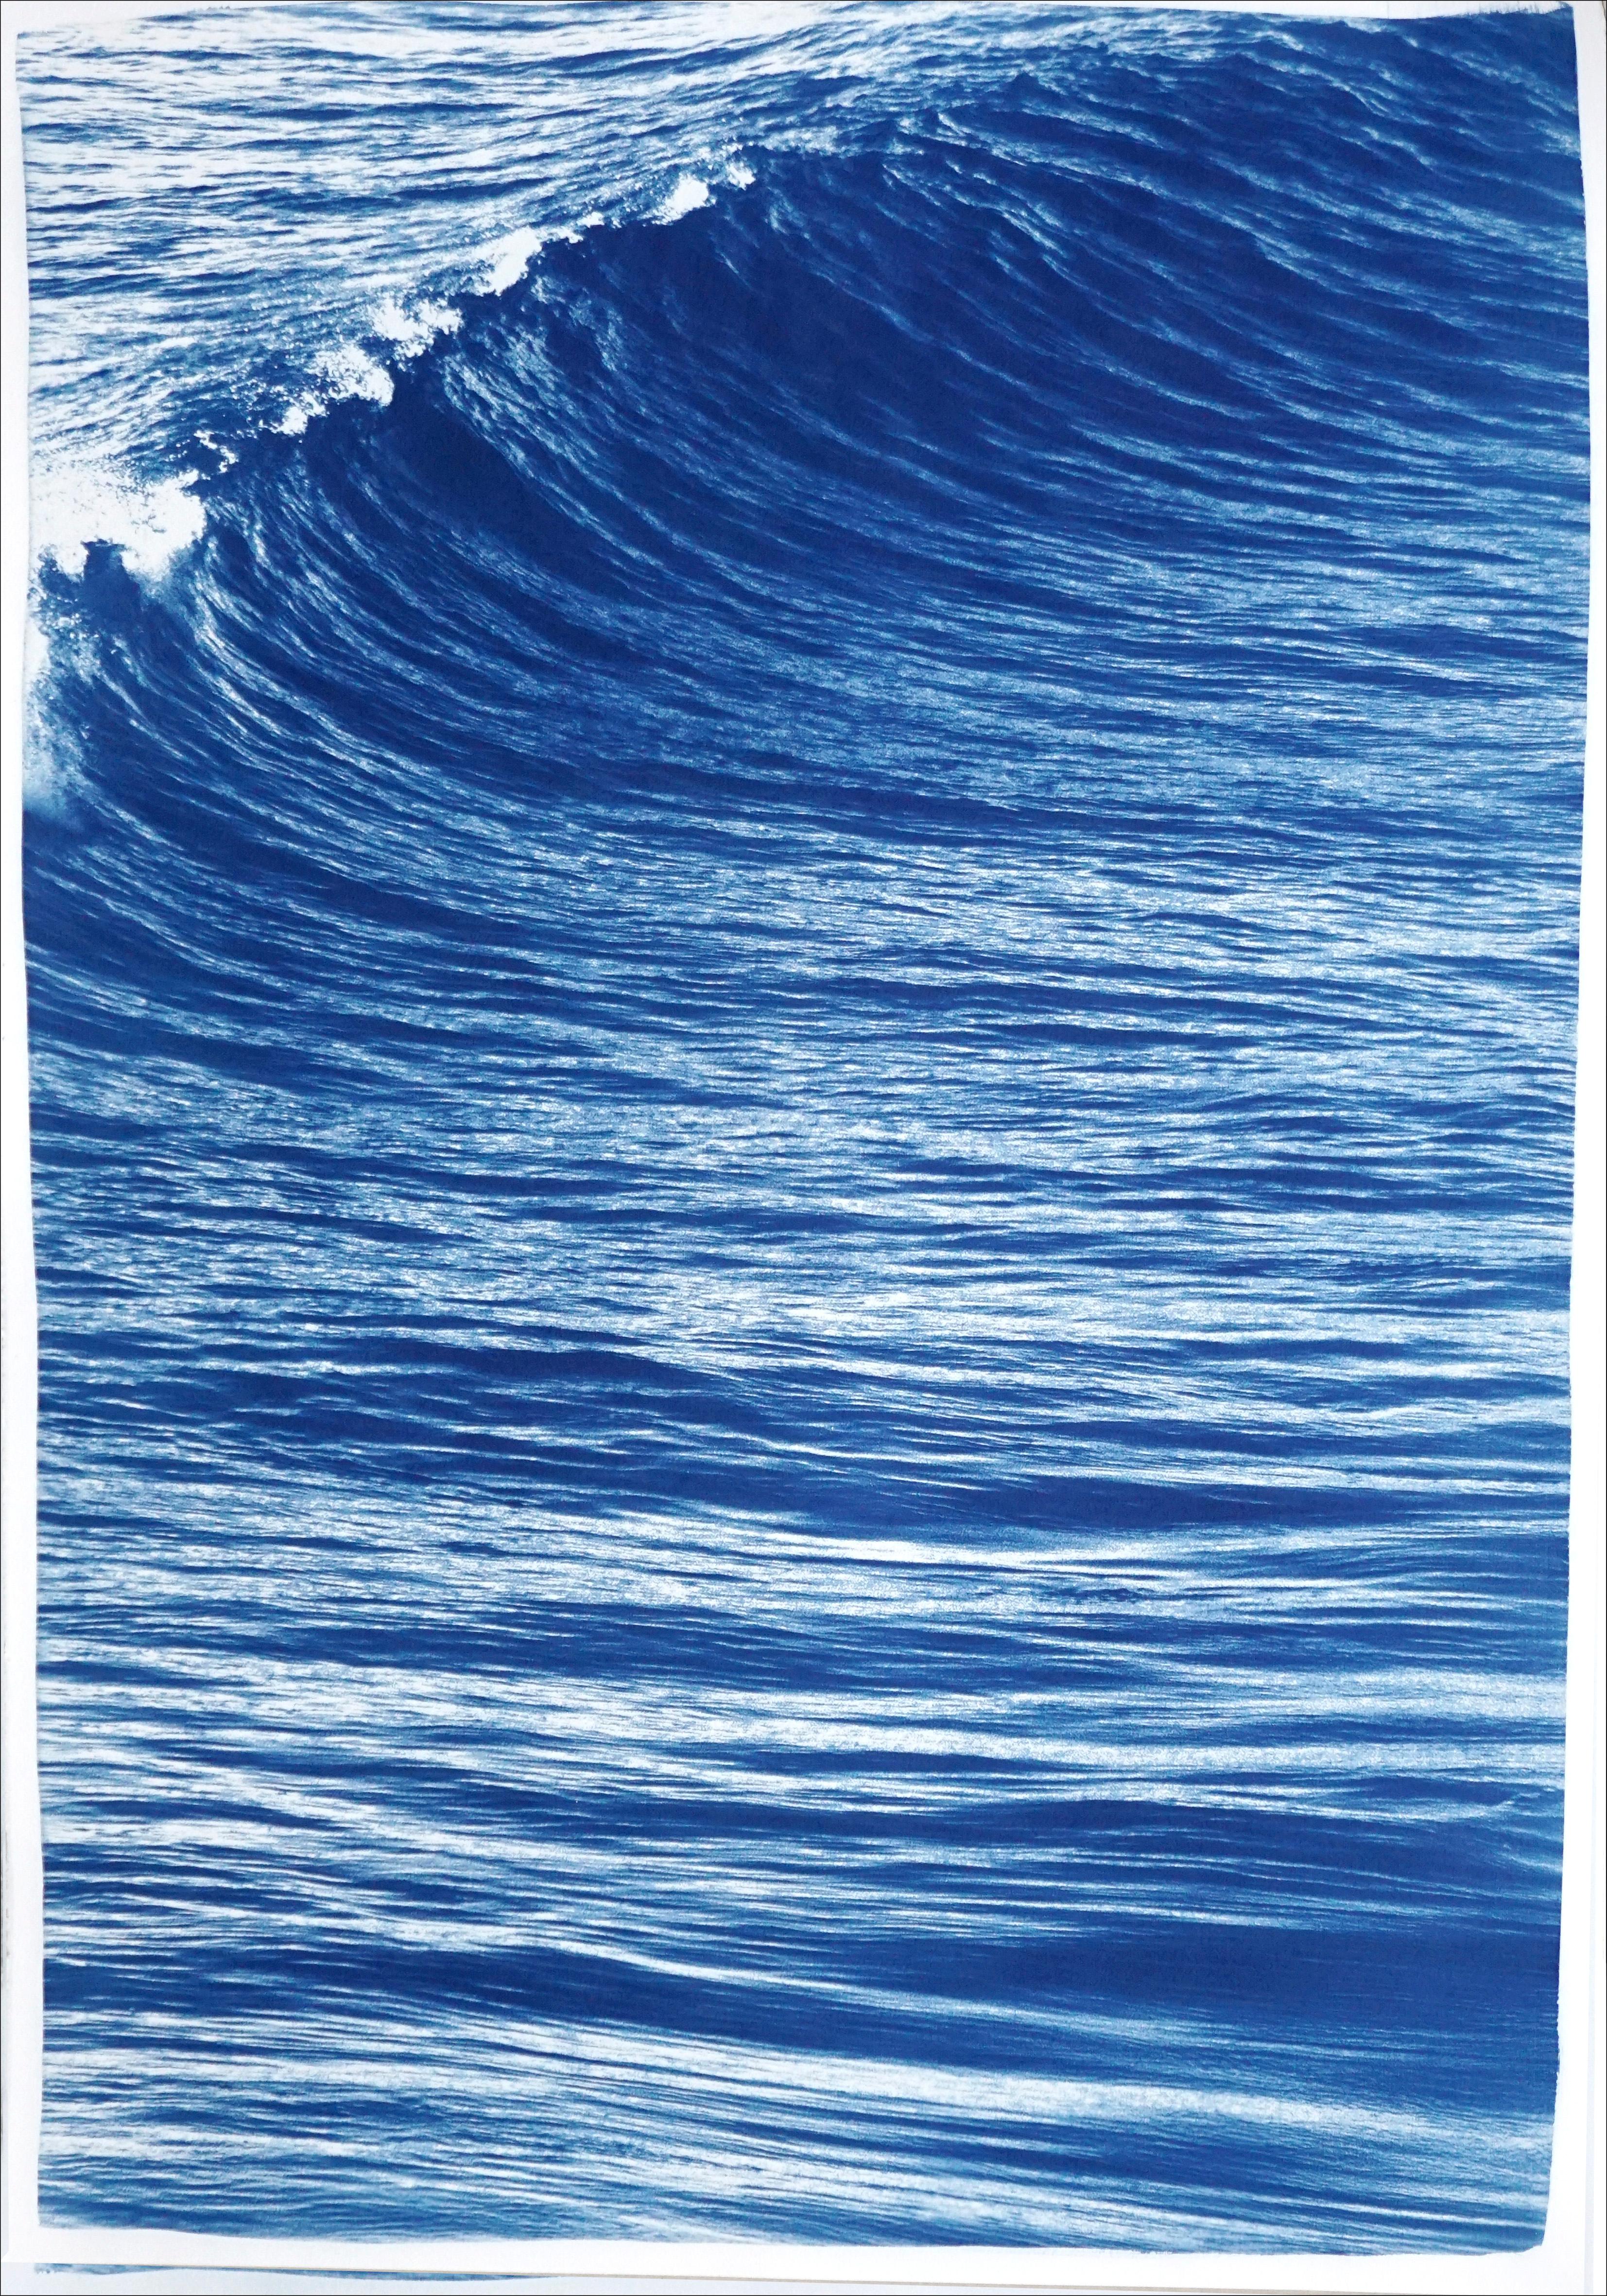 Los Angeles Crashing Waves Triptych, Nautical, Handmade Cyanotype in Blue Tones For Sale 2